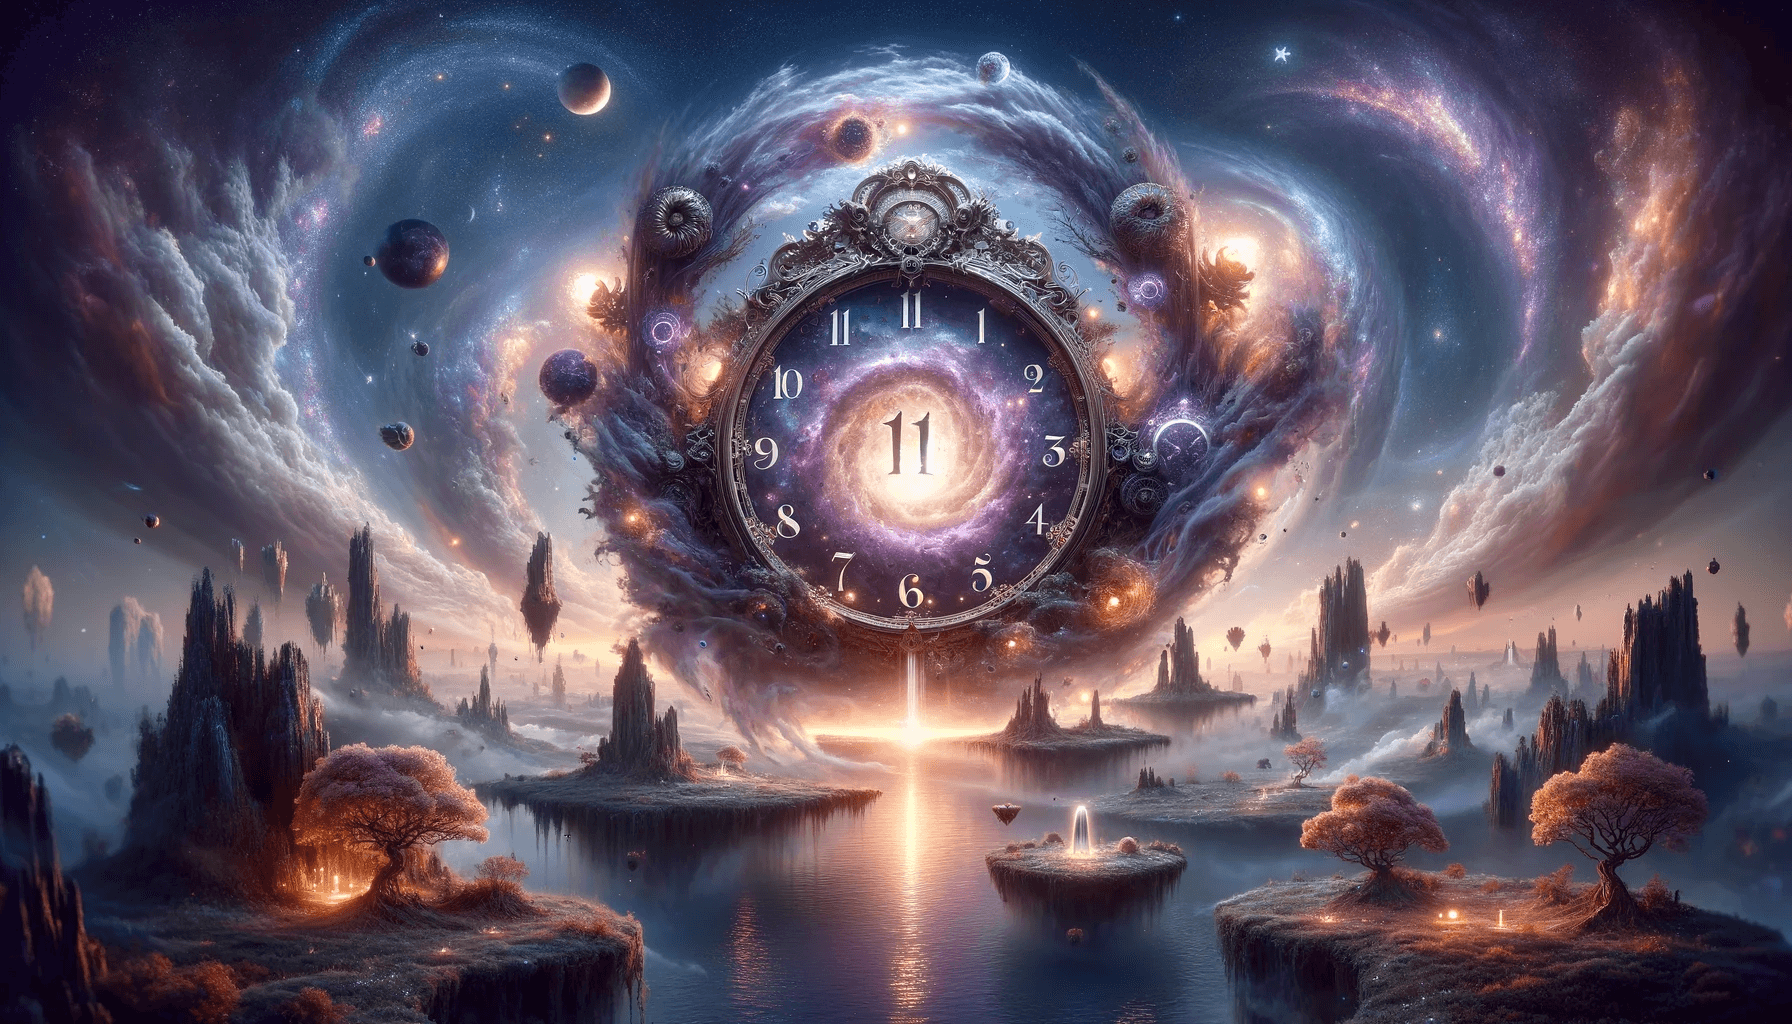 Cracking the Code of 11:11: The Hidden Meaning Behind the Synchronicity